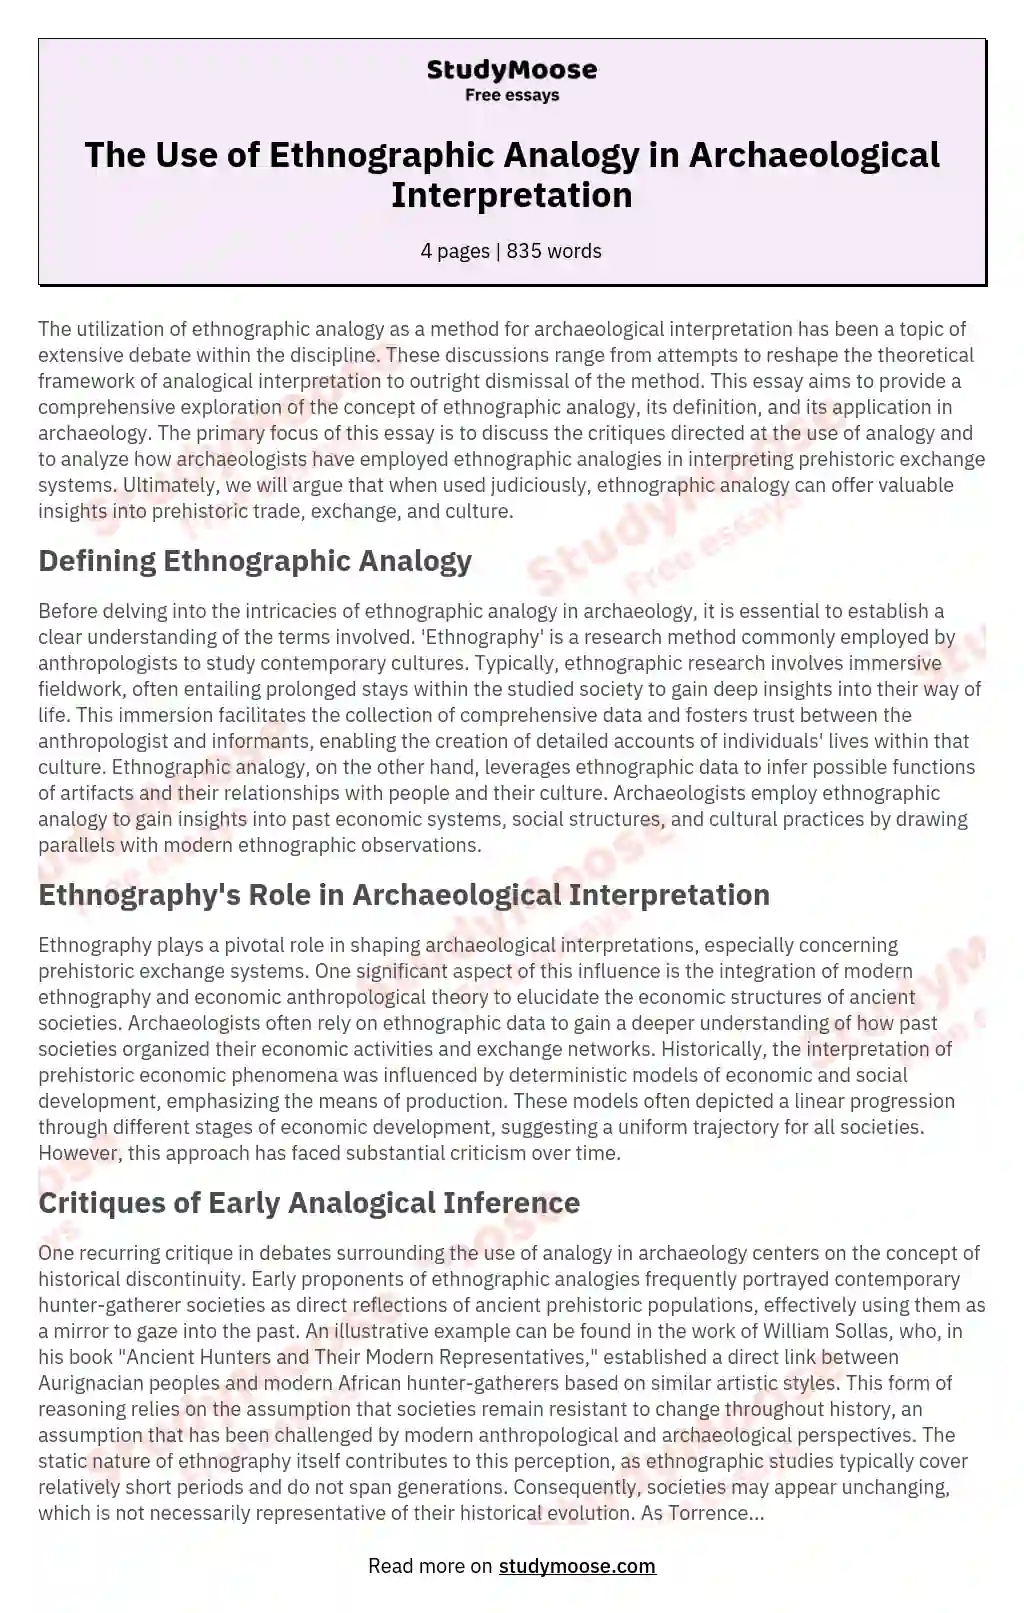 The Use of Ethnographic Analogy in Archaeological Interpretation essay